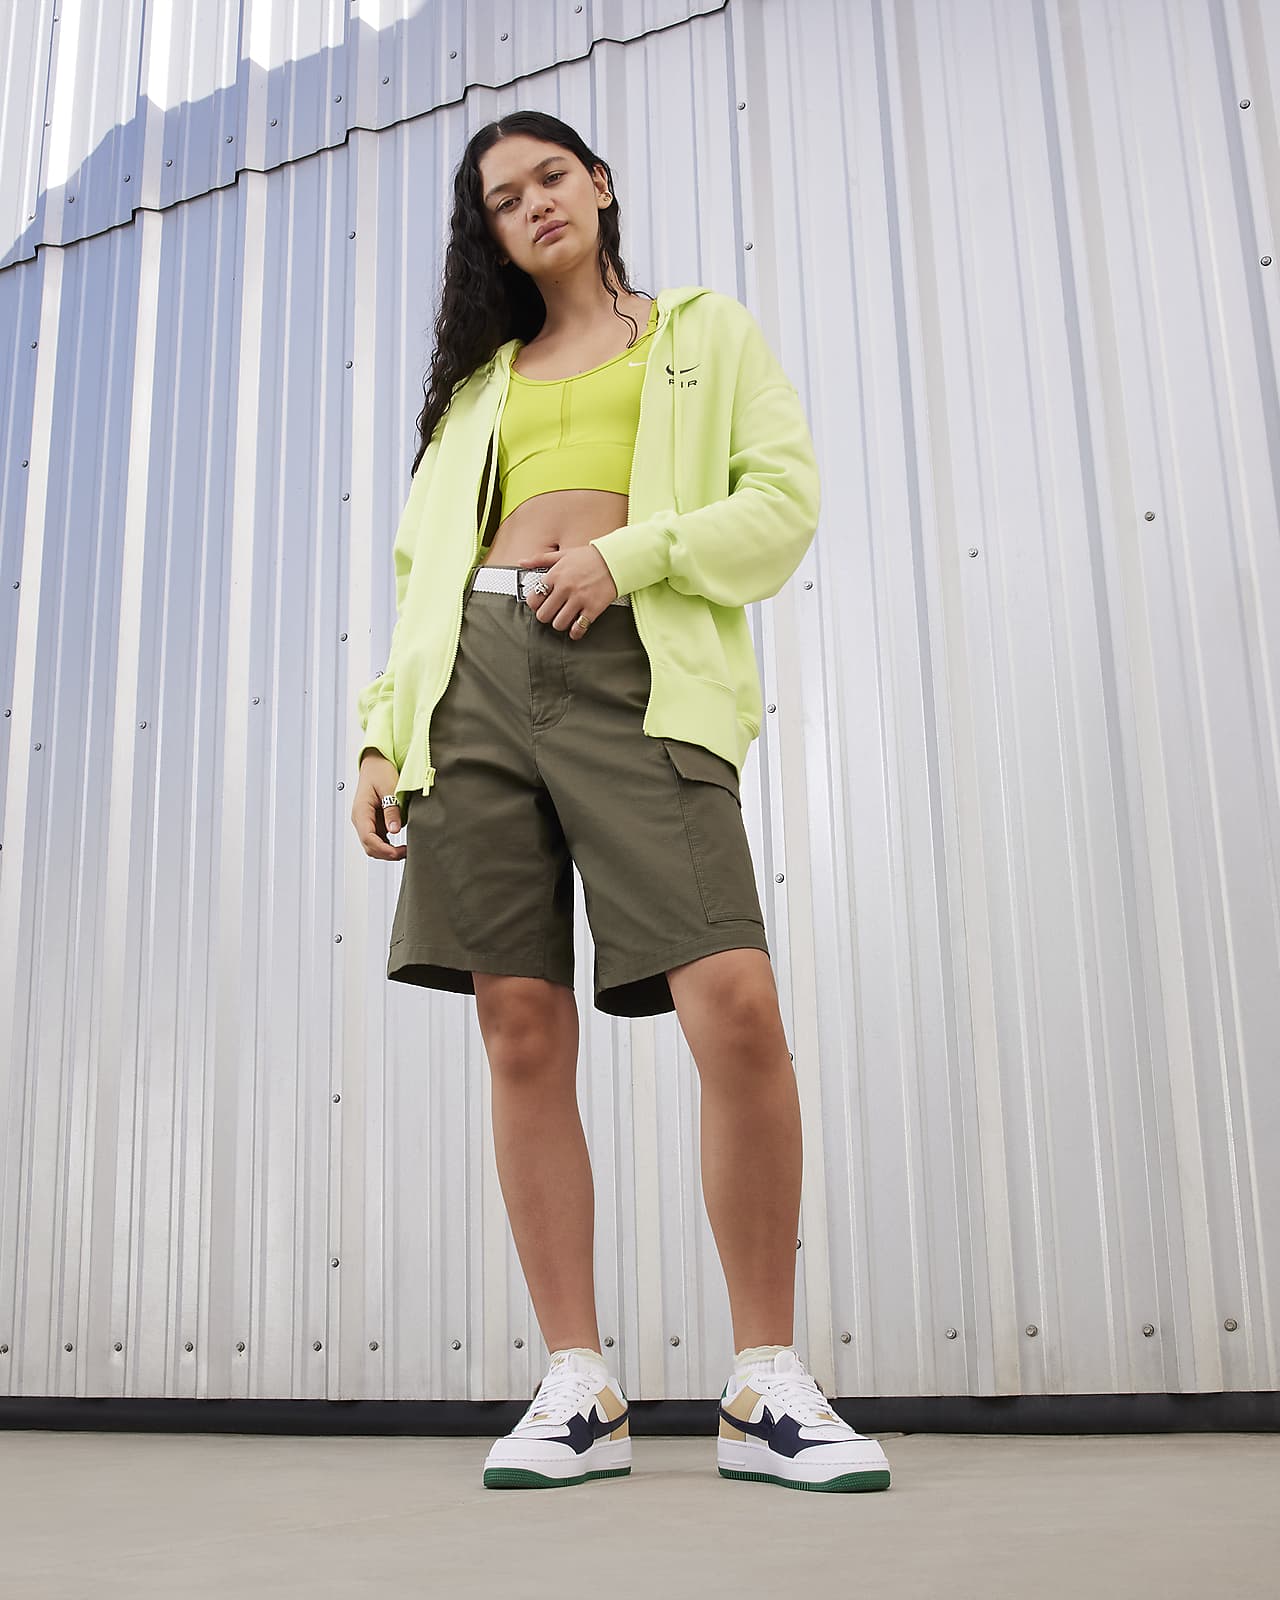 Nike Air Force 1 shadow outfit  Cute summer outfits, Outfits with